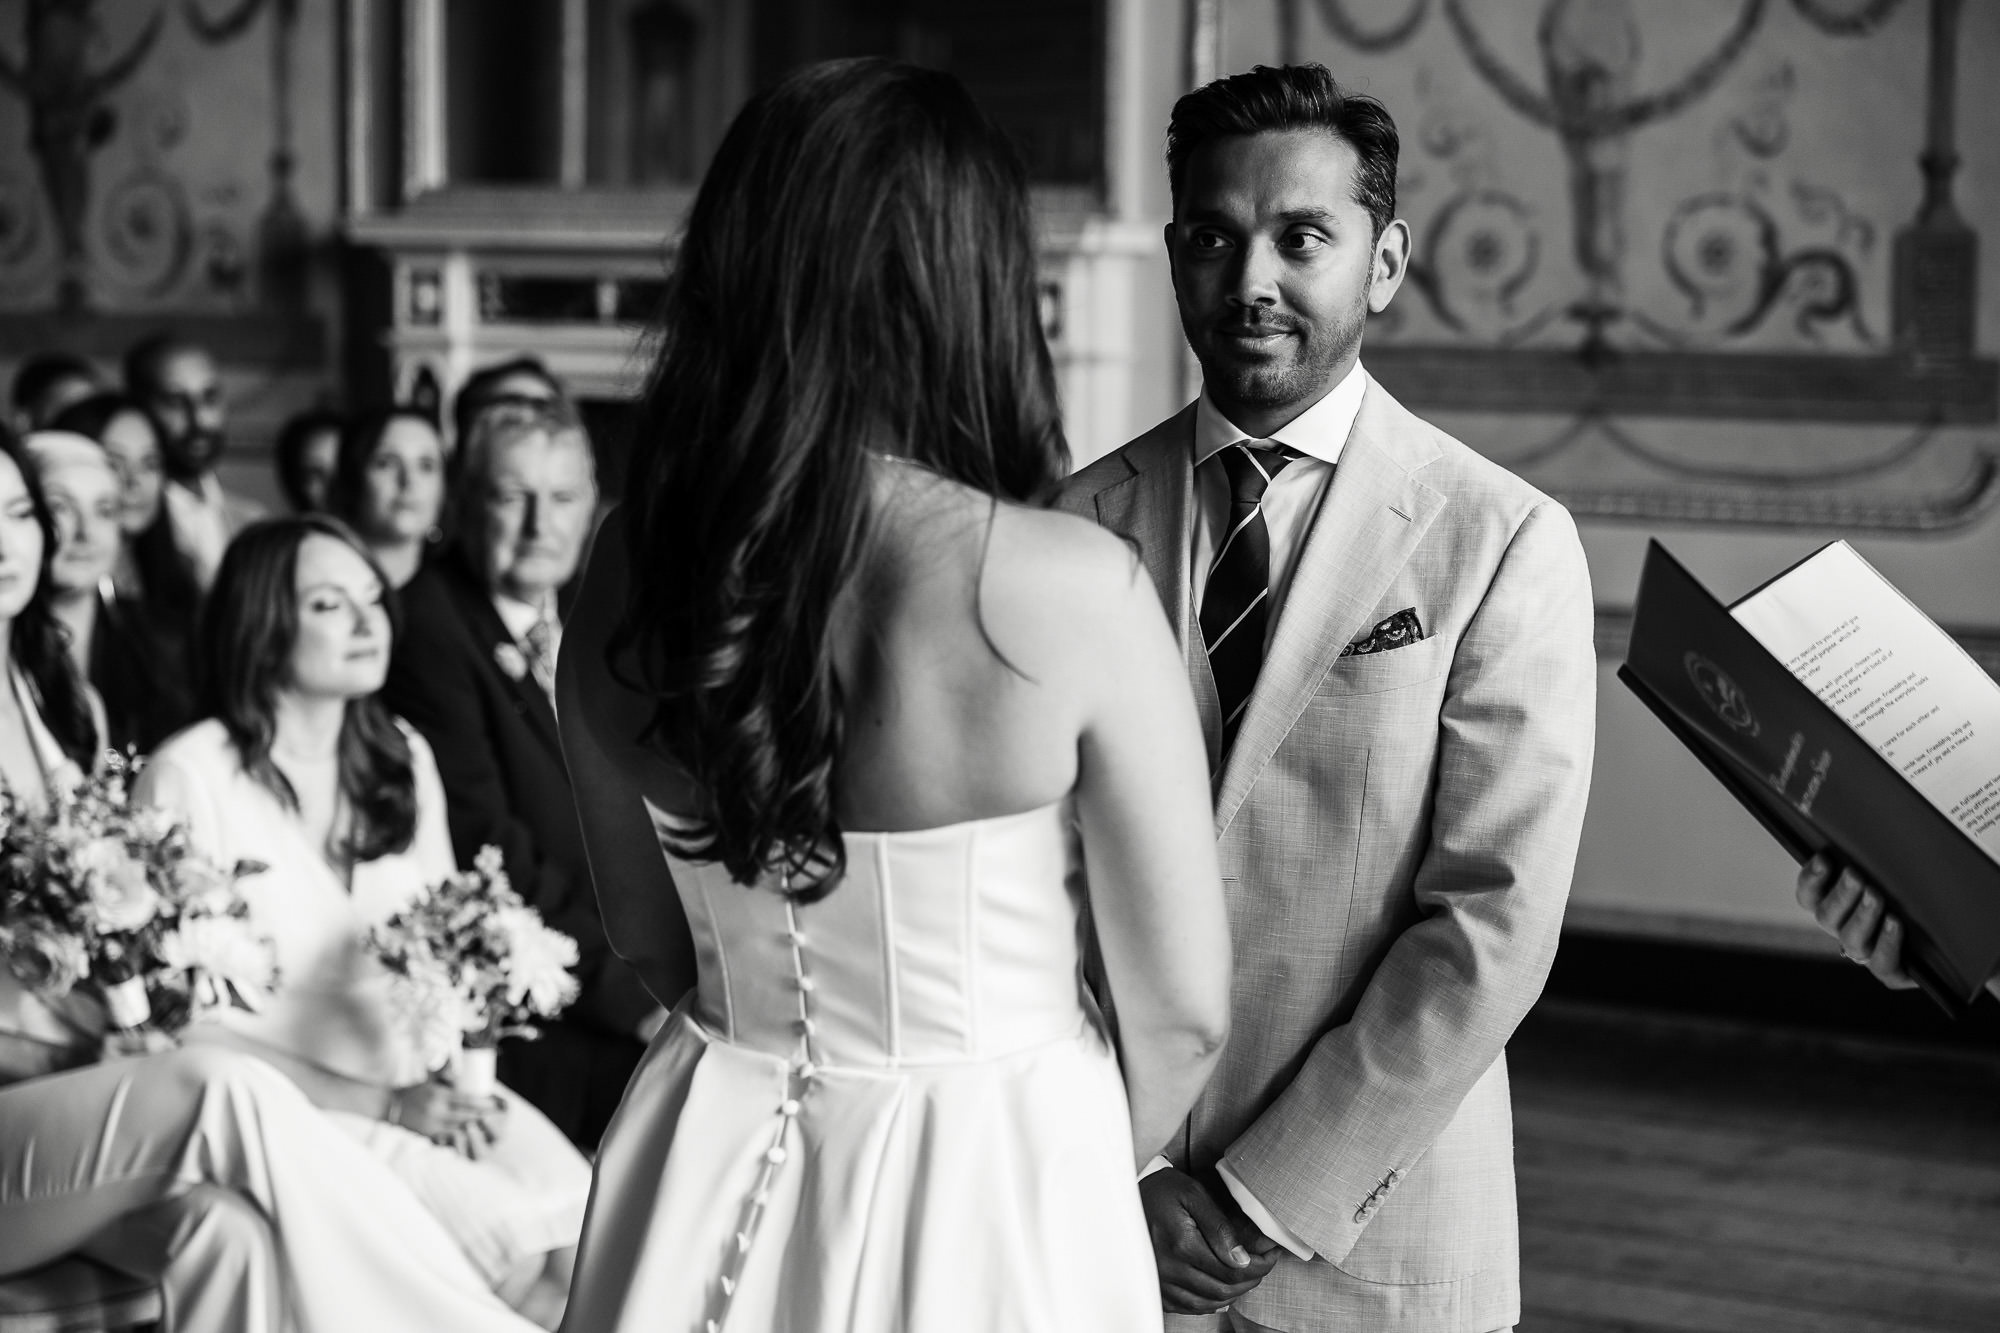 Stowe House, Civil Ceremony, Hindu Wedding, Multicultural Wedding Photographer, The Music Room